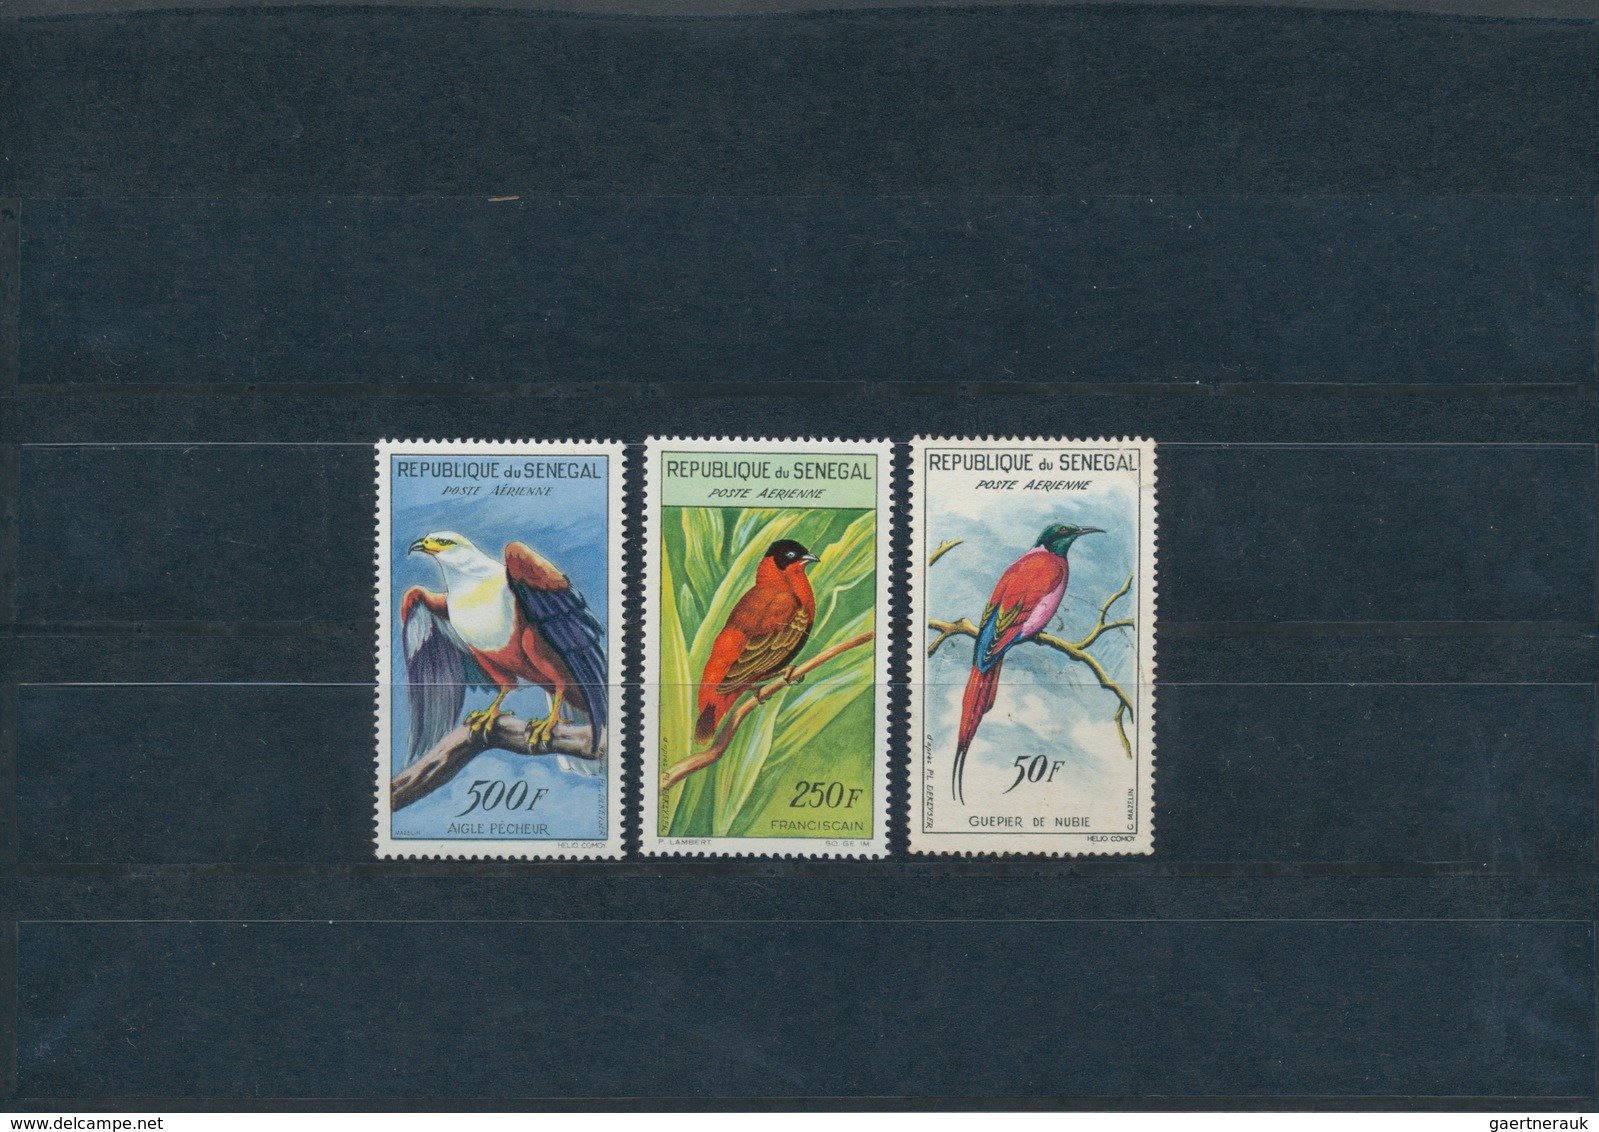 25660 Thematik: Tiere, Fauna / animals, fauna: 1940/2005 (ca.), unmounted mint collection/accumulation on